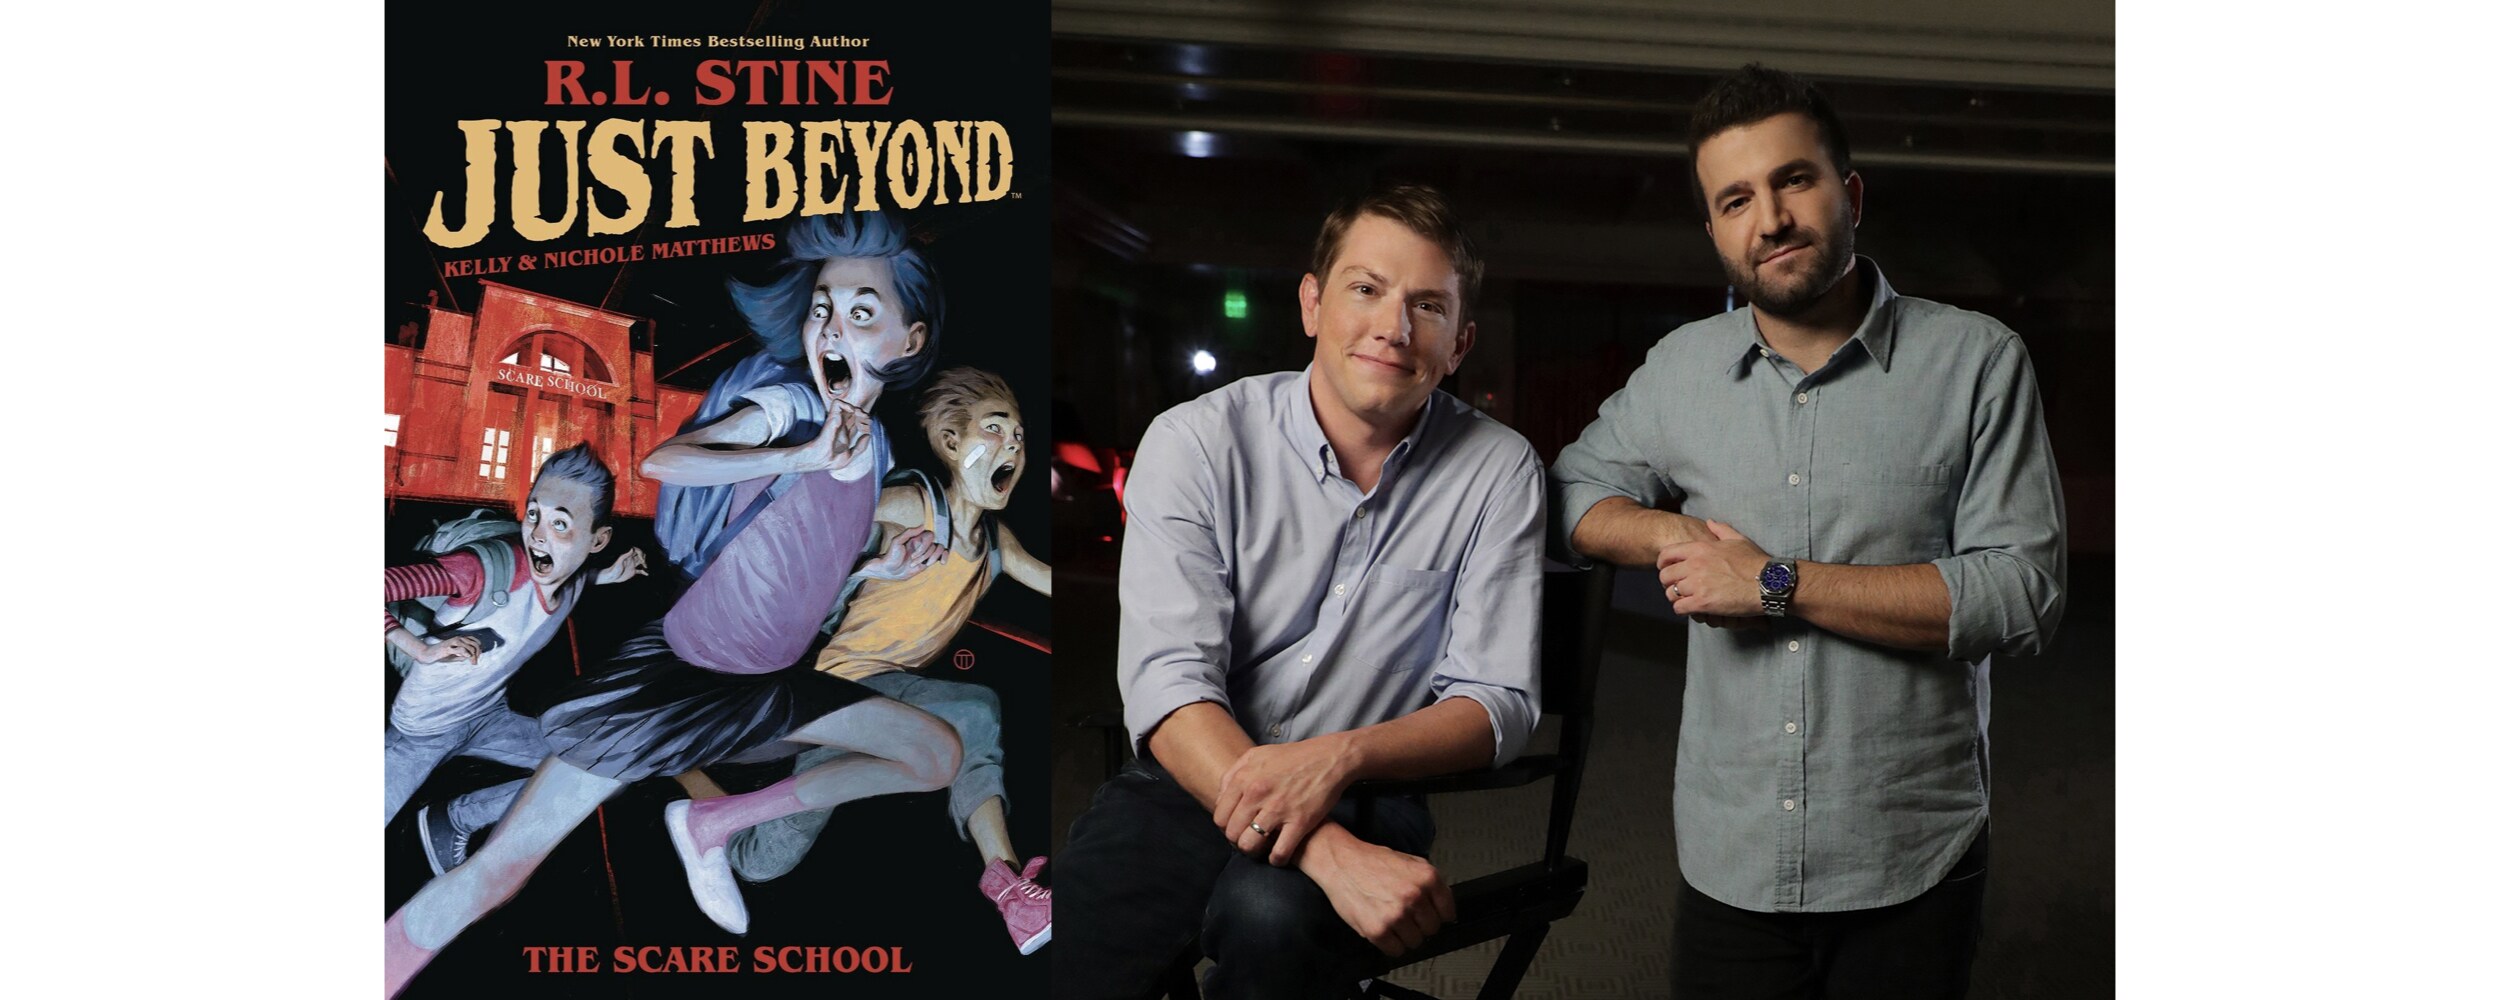 Disney+ Greenlights 'Just Beyond' Series From Seth Grahame-Smith Based on the Best-Selling Graphic Novels by R.L. Stine